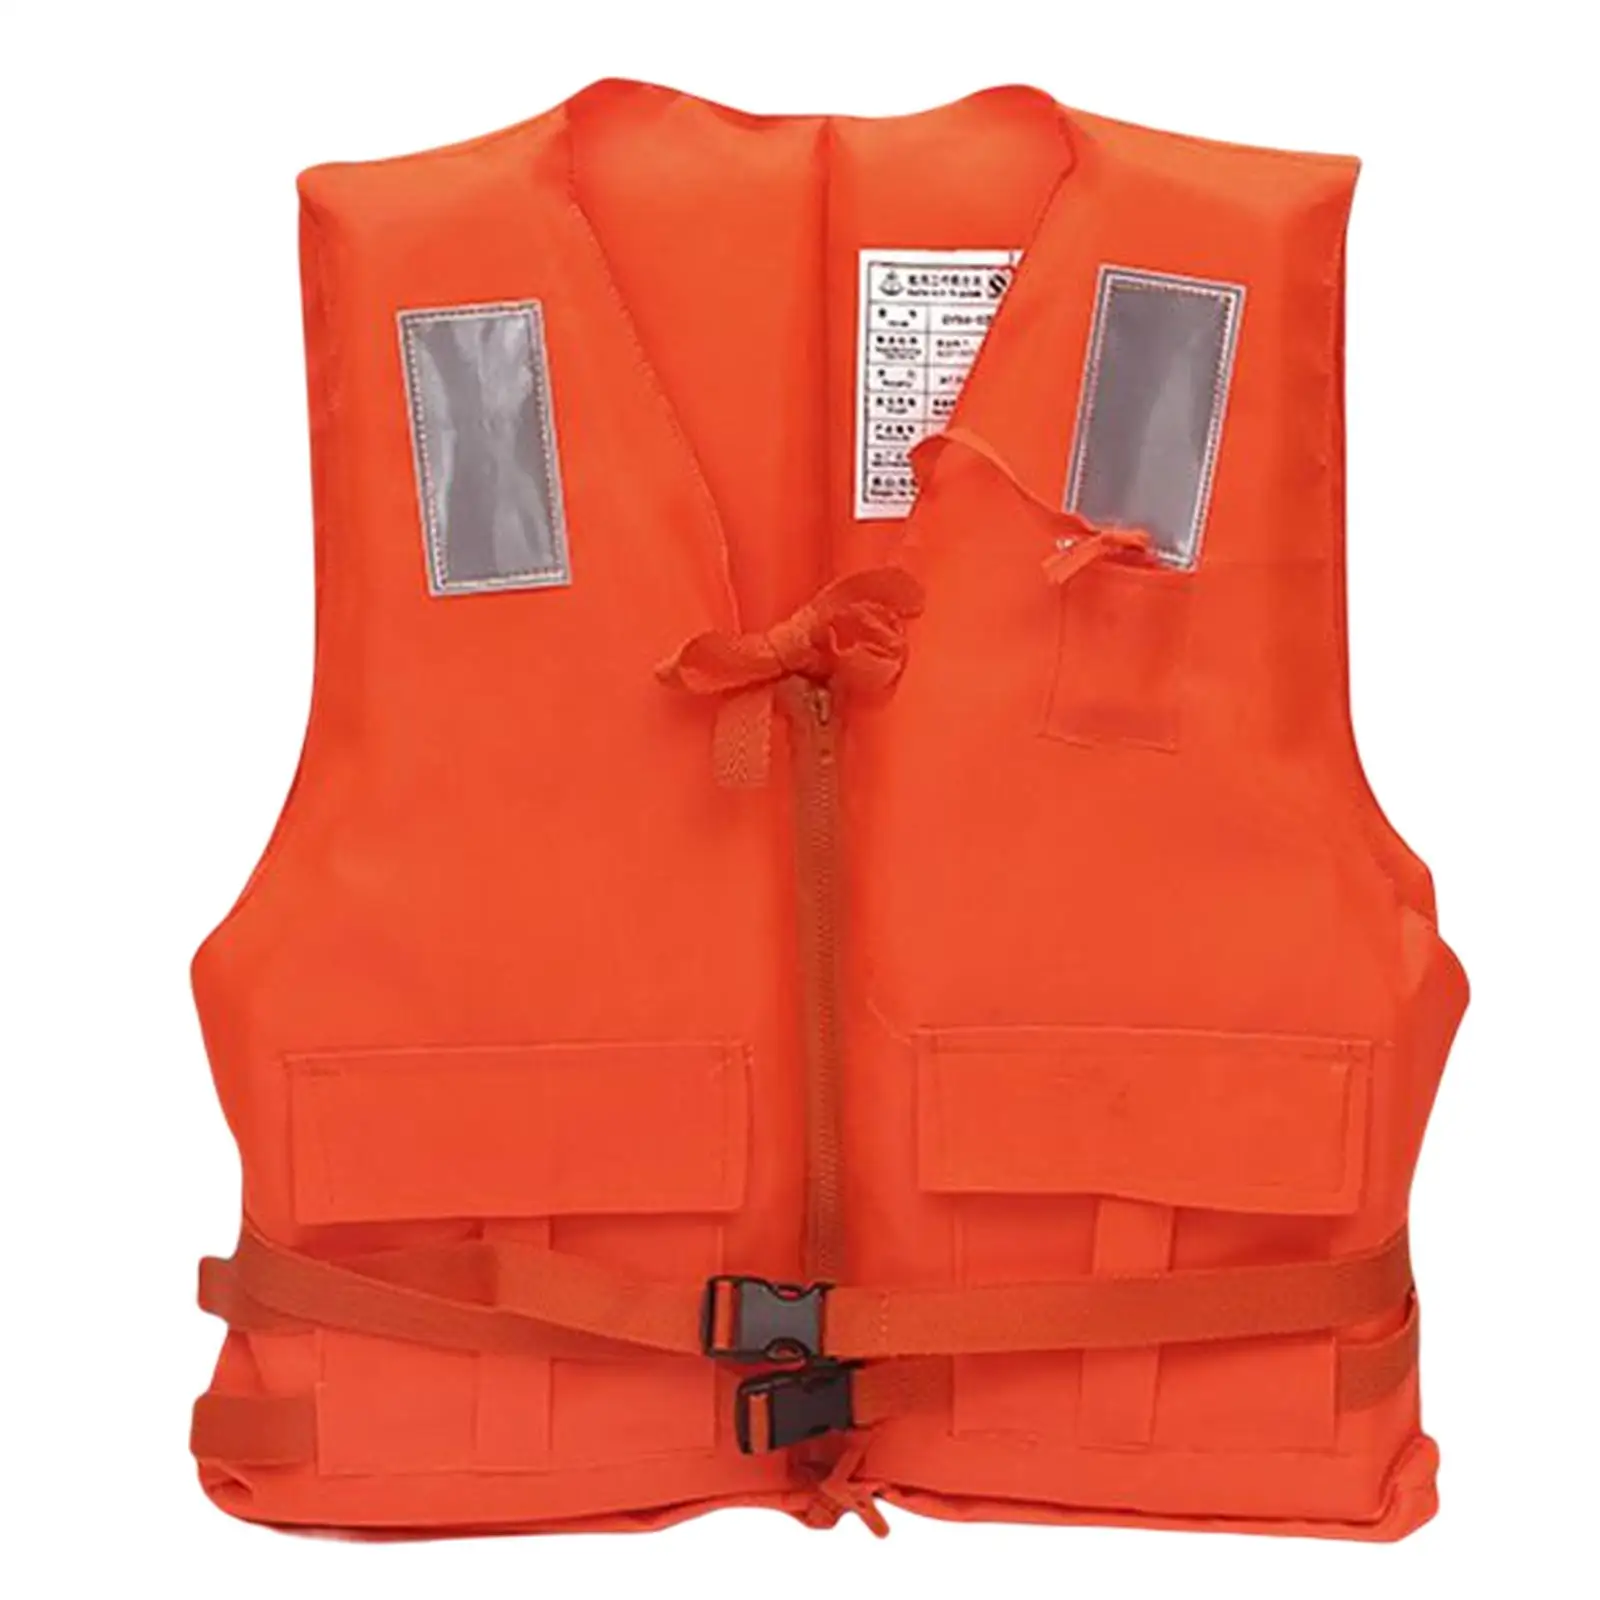 Outdoor Life Jacket Fly Fishing Jacket Reflective Adjustable Adult Life Vest Waistcoat for Ski Surfing Sailing Canoeing Wimming